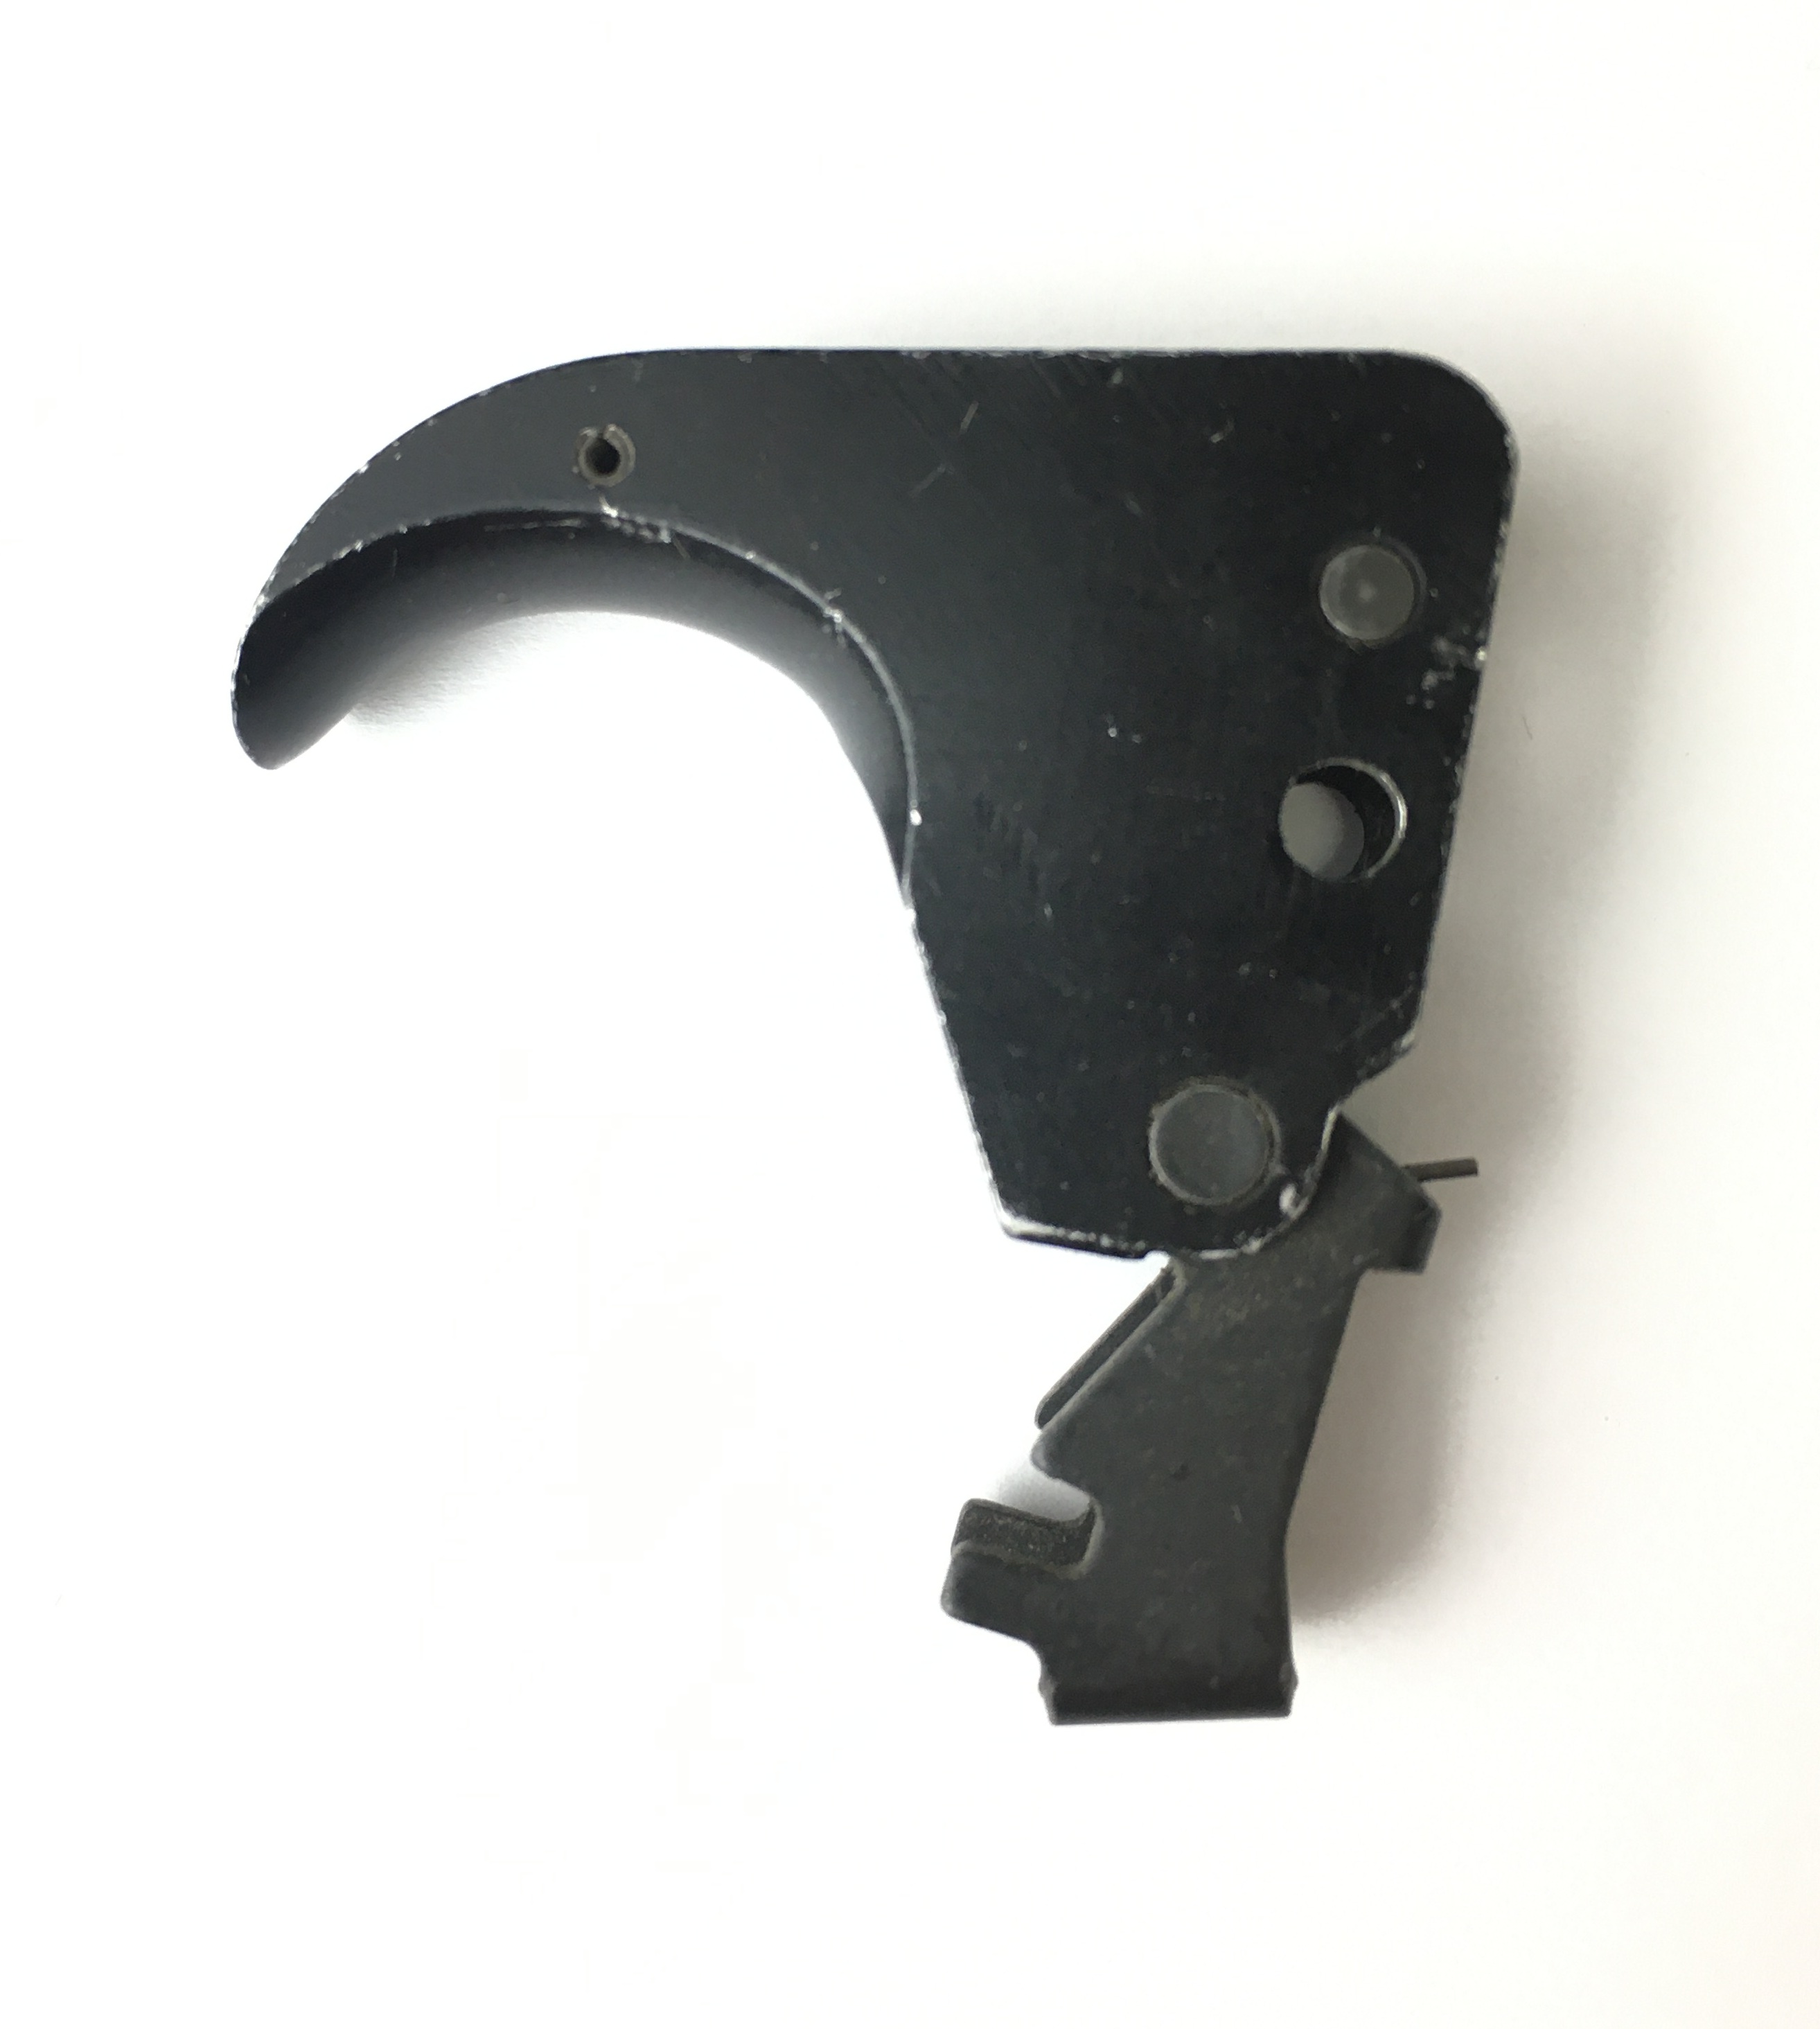 M249 Trigger Assembly